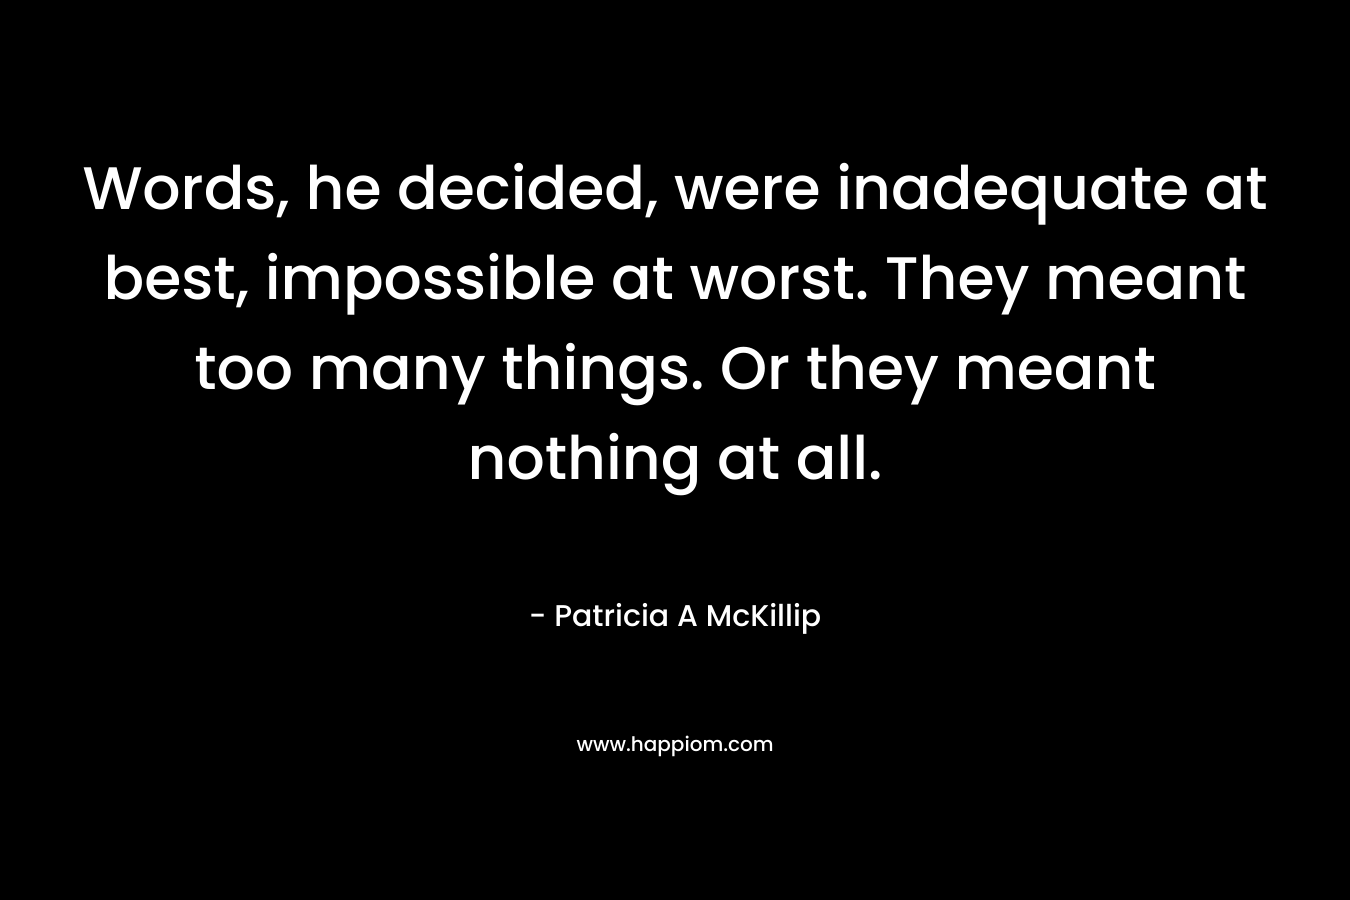 Words, he decided, were inadequate at best, impossible at worst. They meant too many things. Or they meant nothing at all.